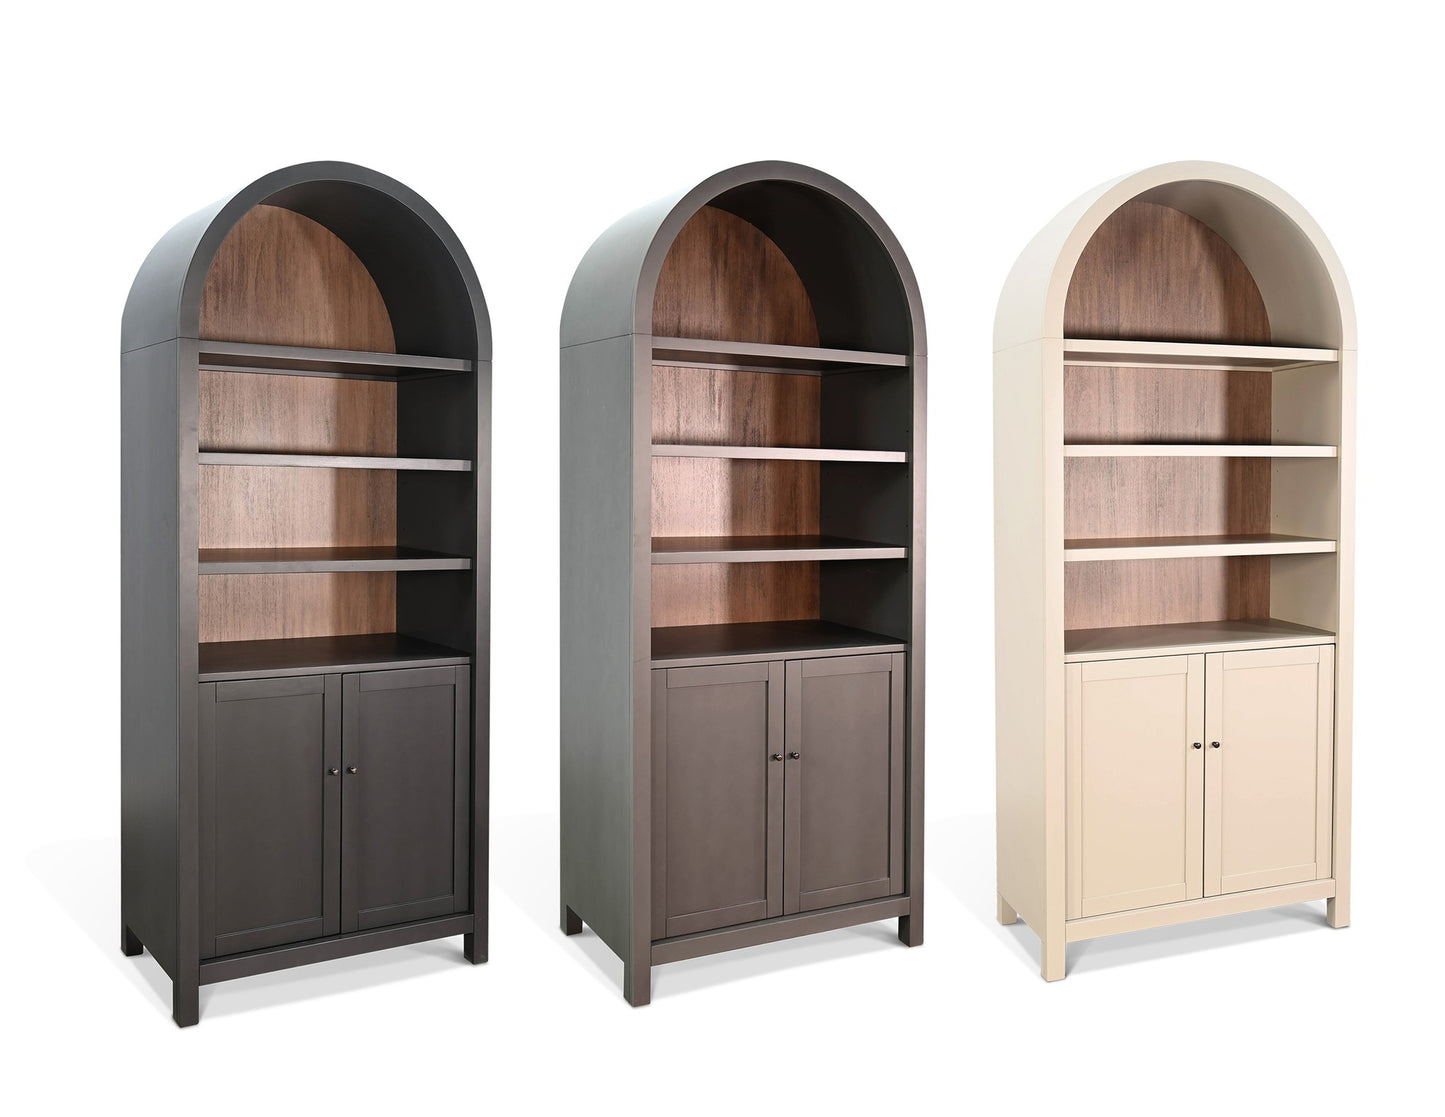 Arched Top Bookshelf Cabinet